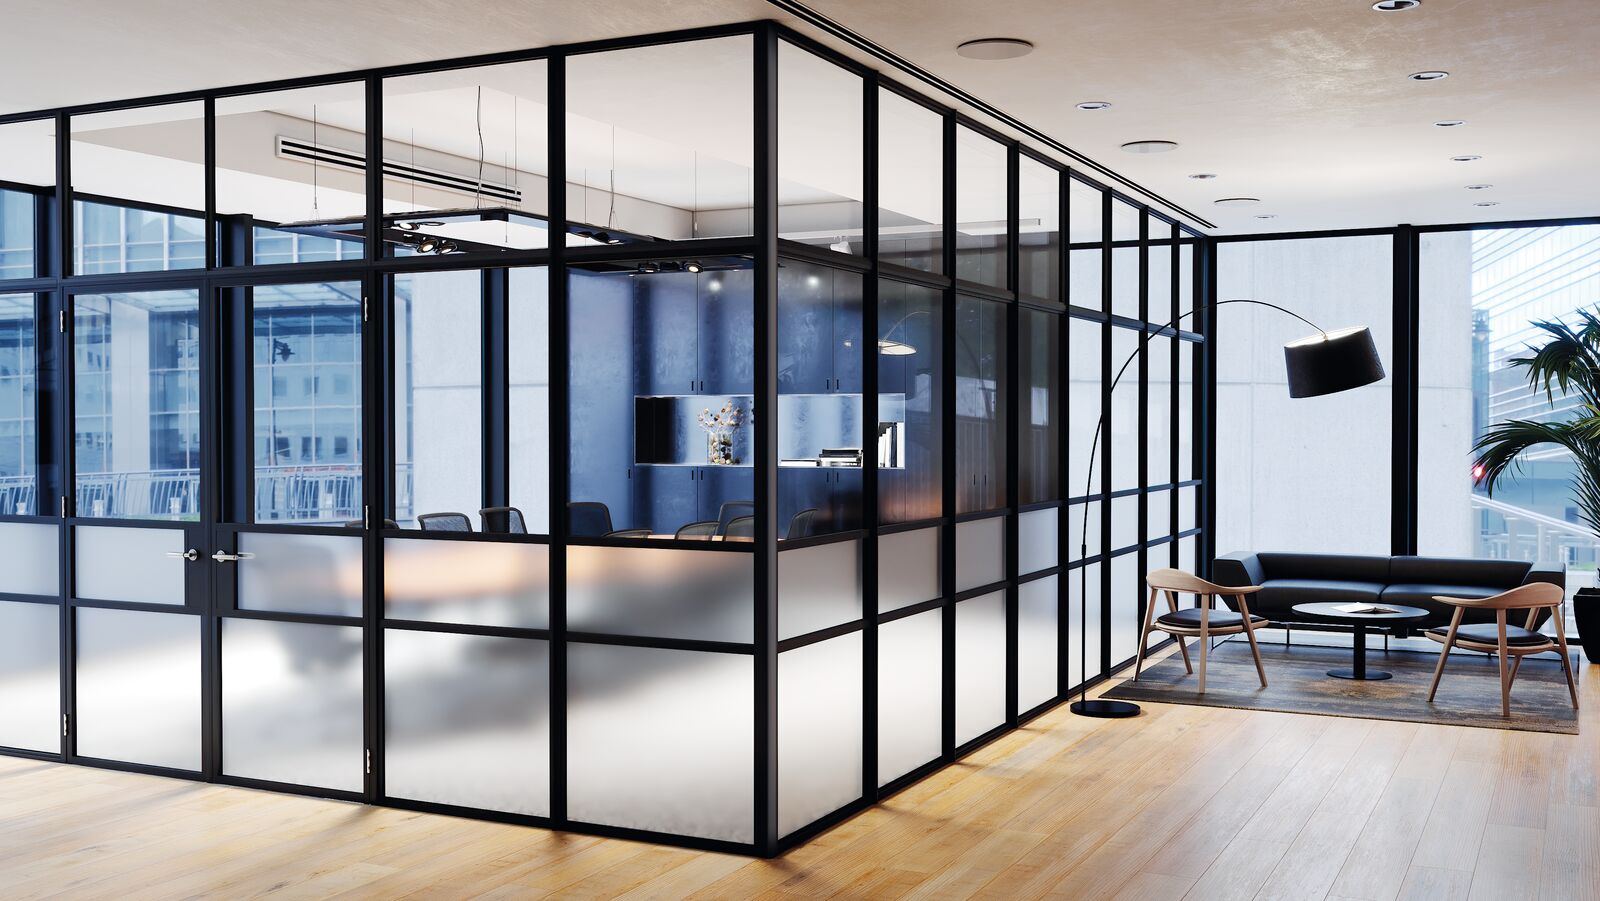 Internal door with black hardware creating a separate room with glass walls